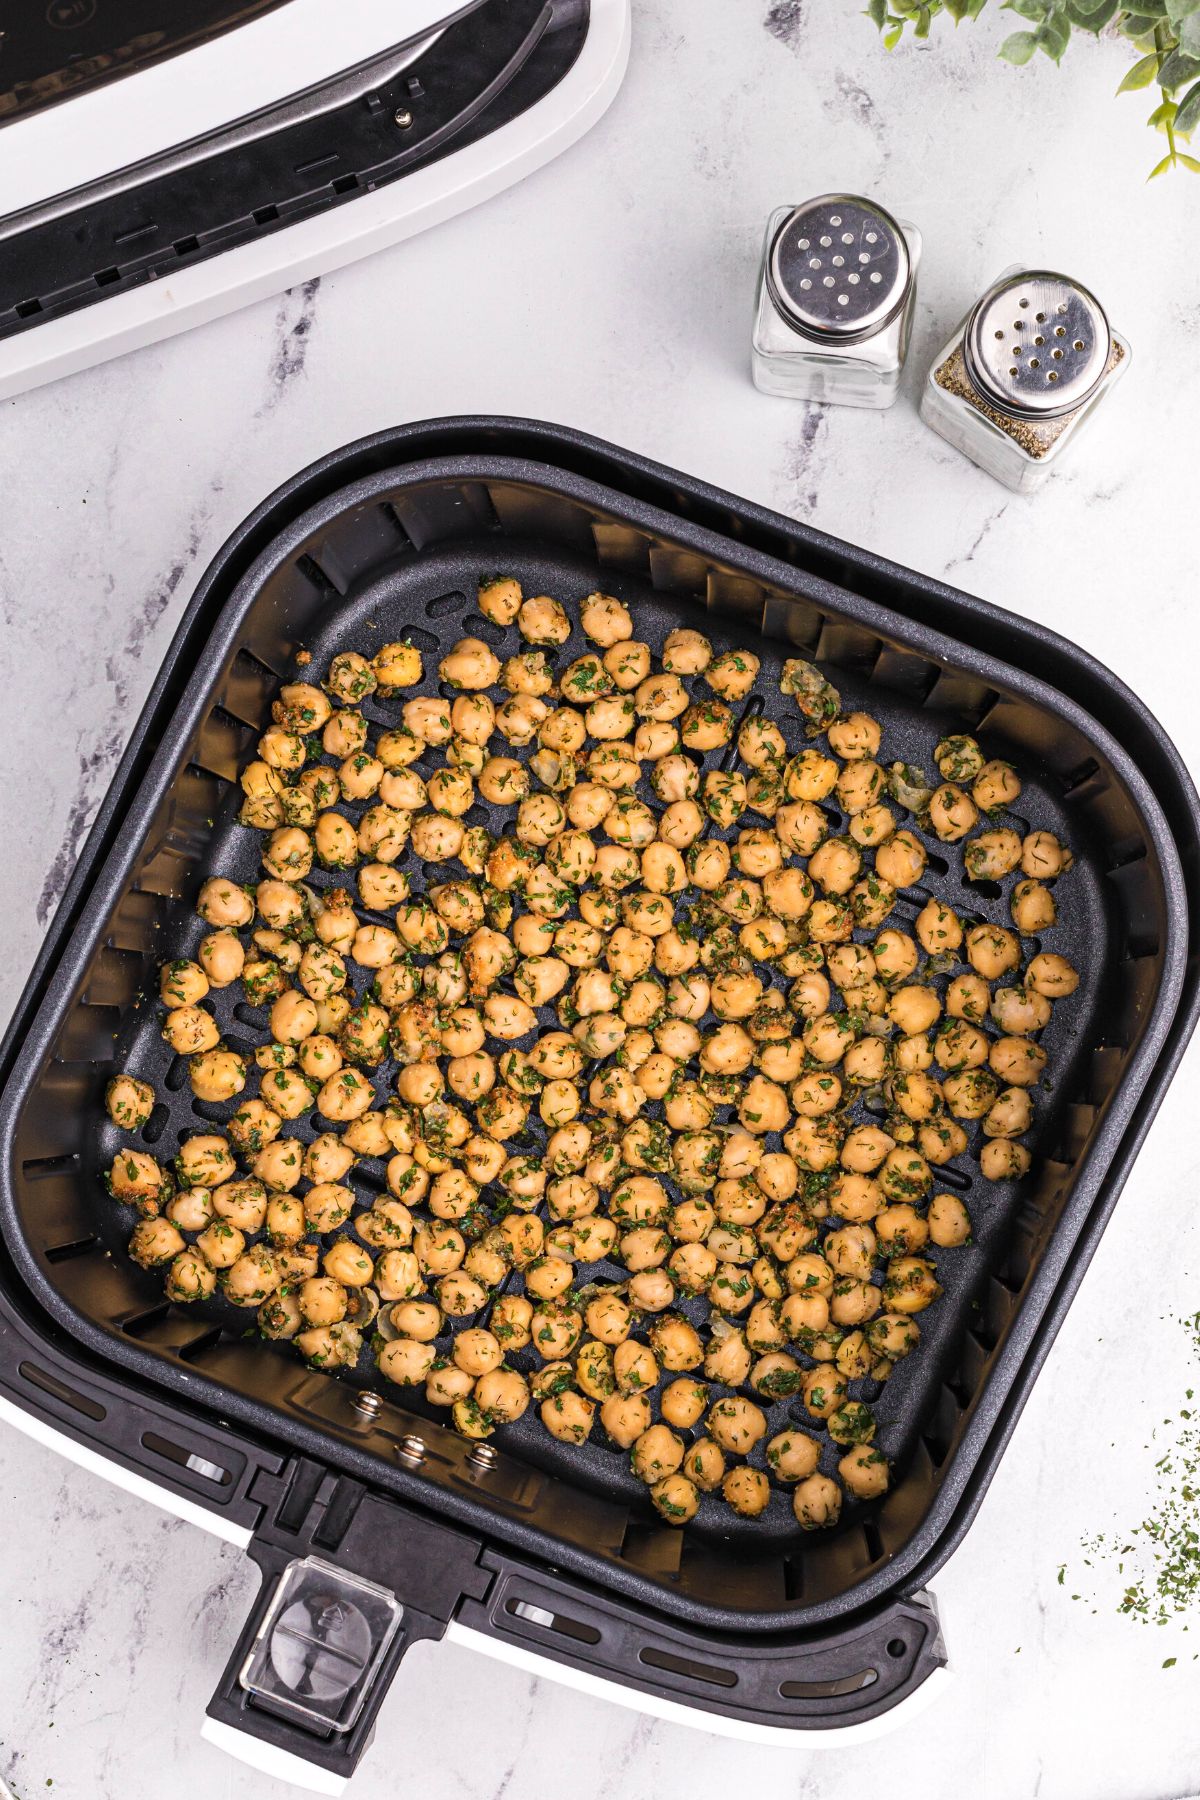 Coated chickpeas in the air fryer basket before being cooked